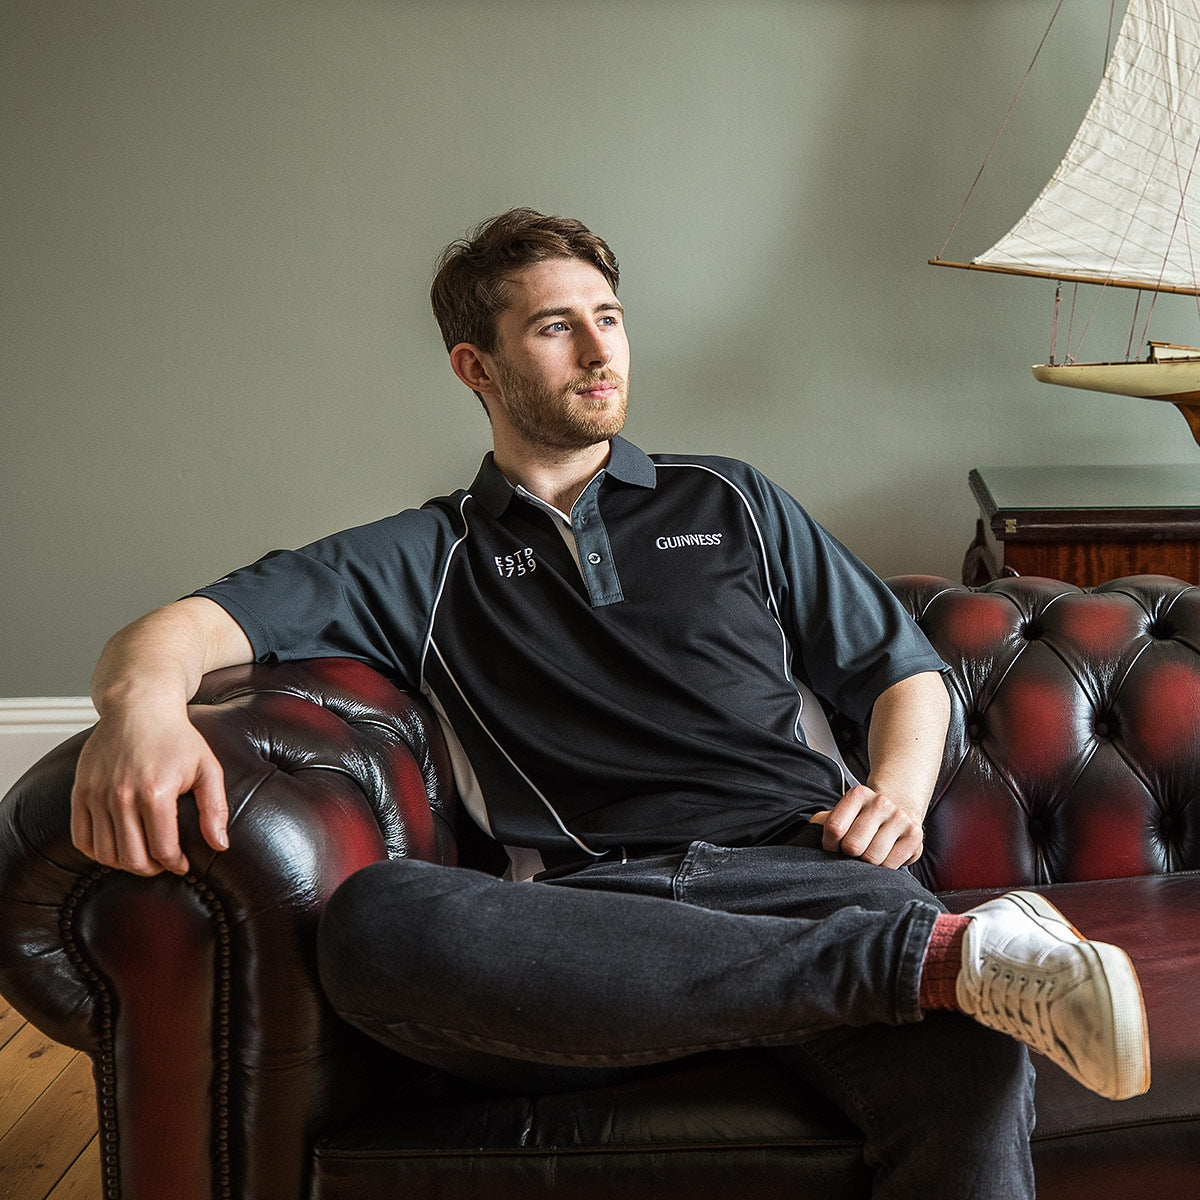 A man wearing a Guinness Performance Polo Shirt sits comfortably on a leather couch, while the view of a boat in the background adds to the scene.